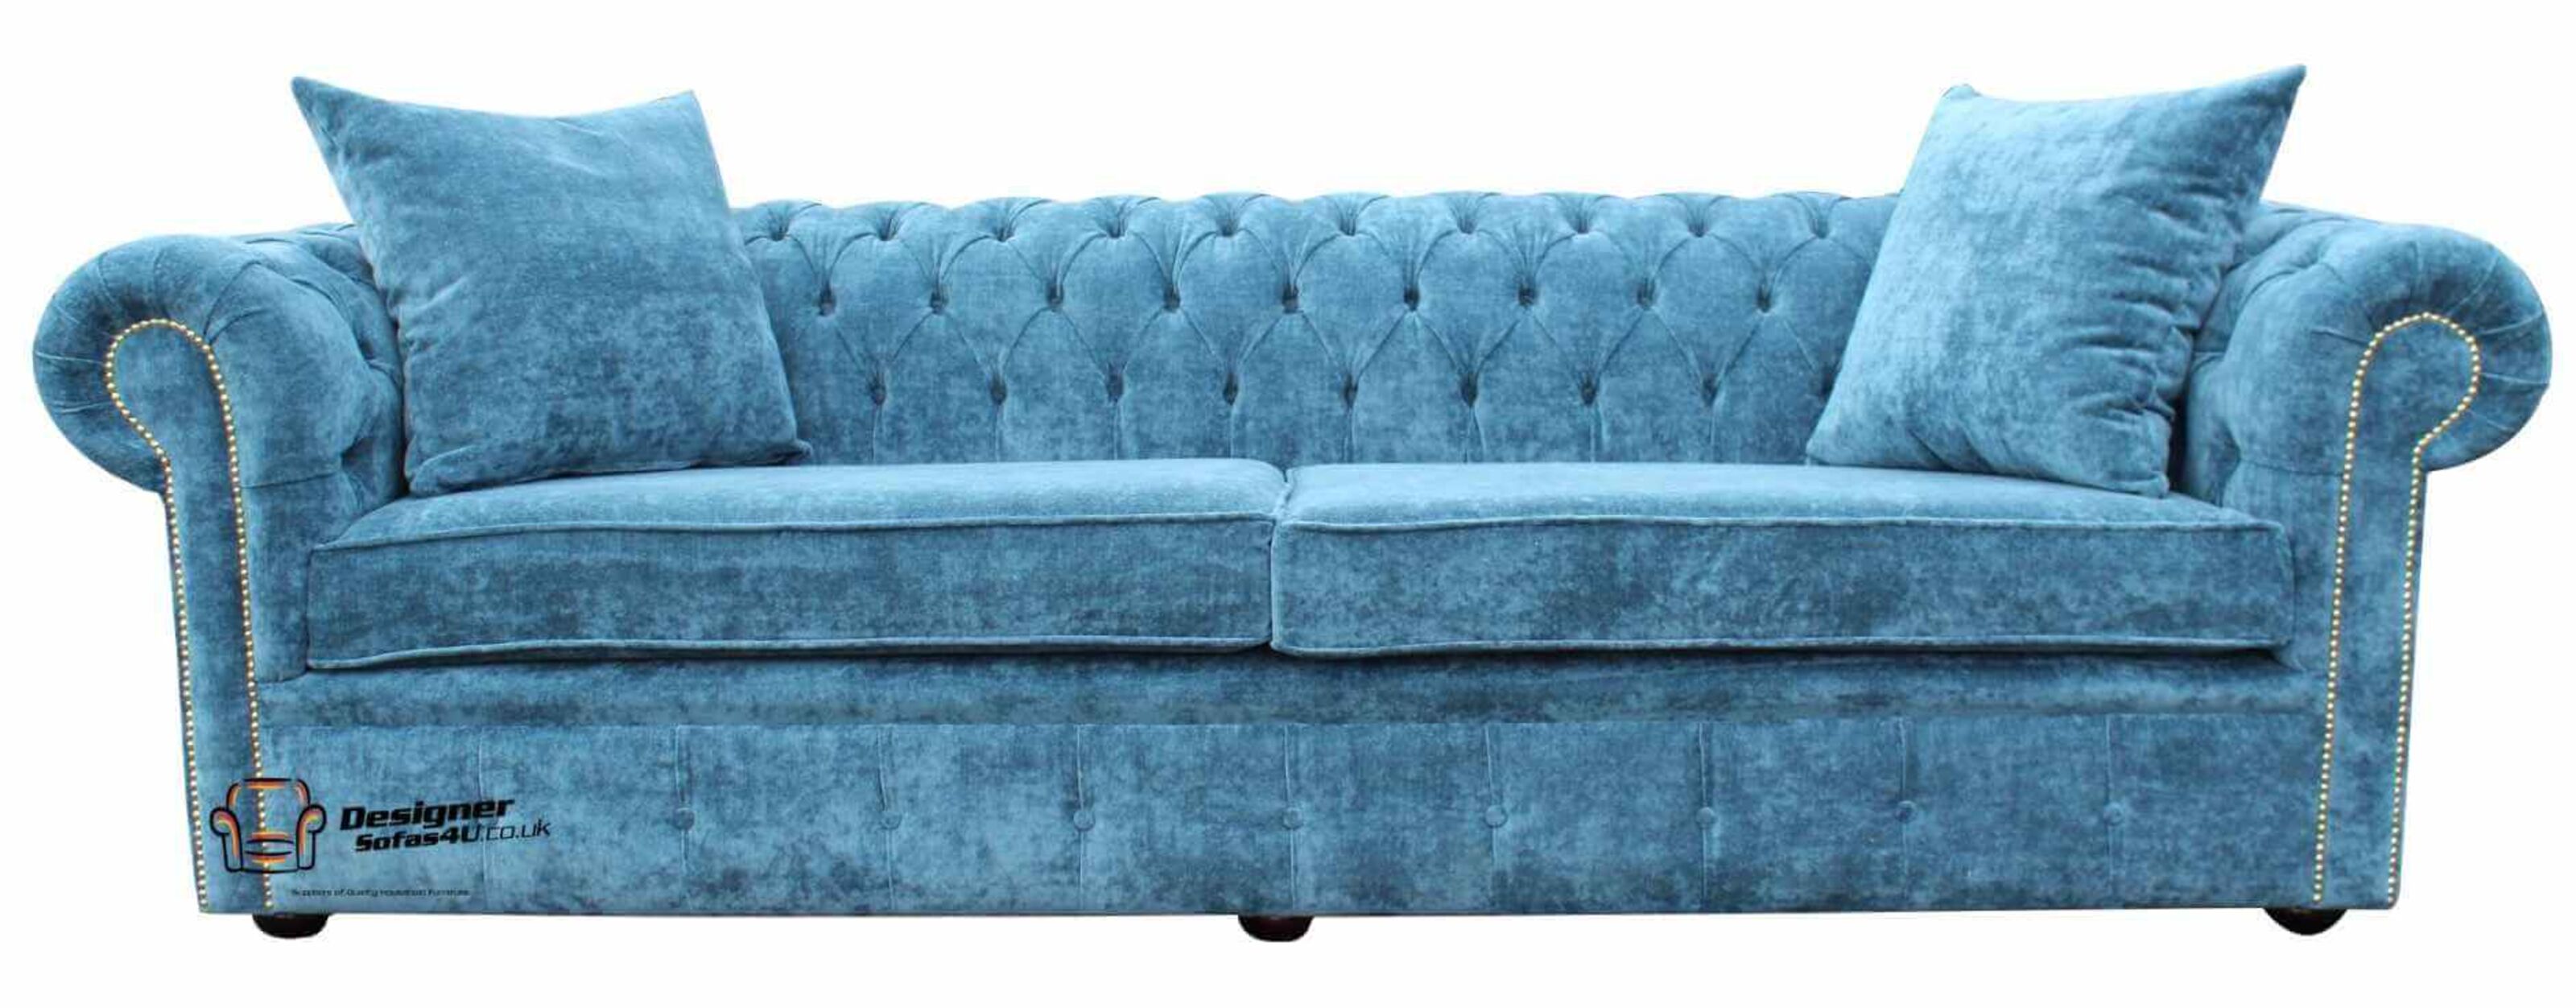 Accentuated Comfort: Chesterfield Sofas with Included Pillows  %Post Title